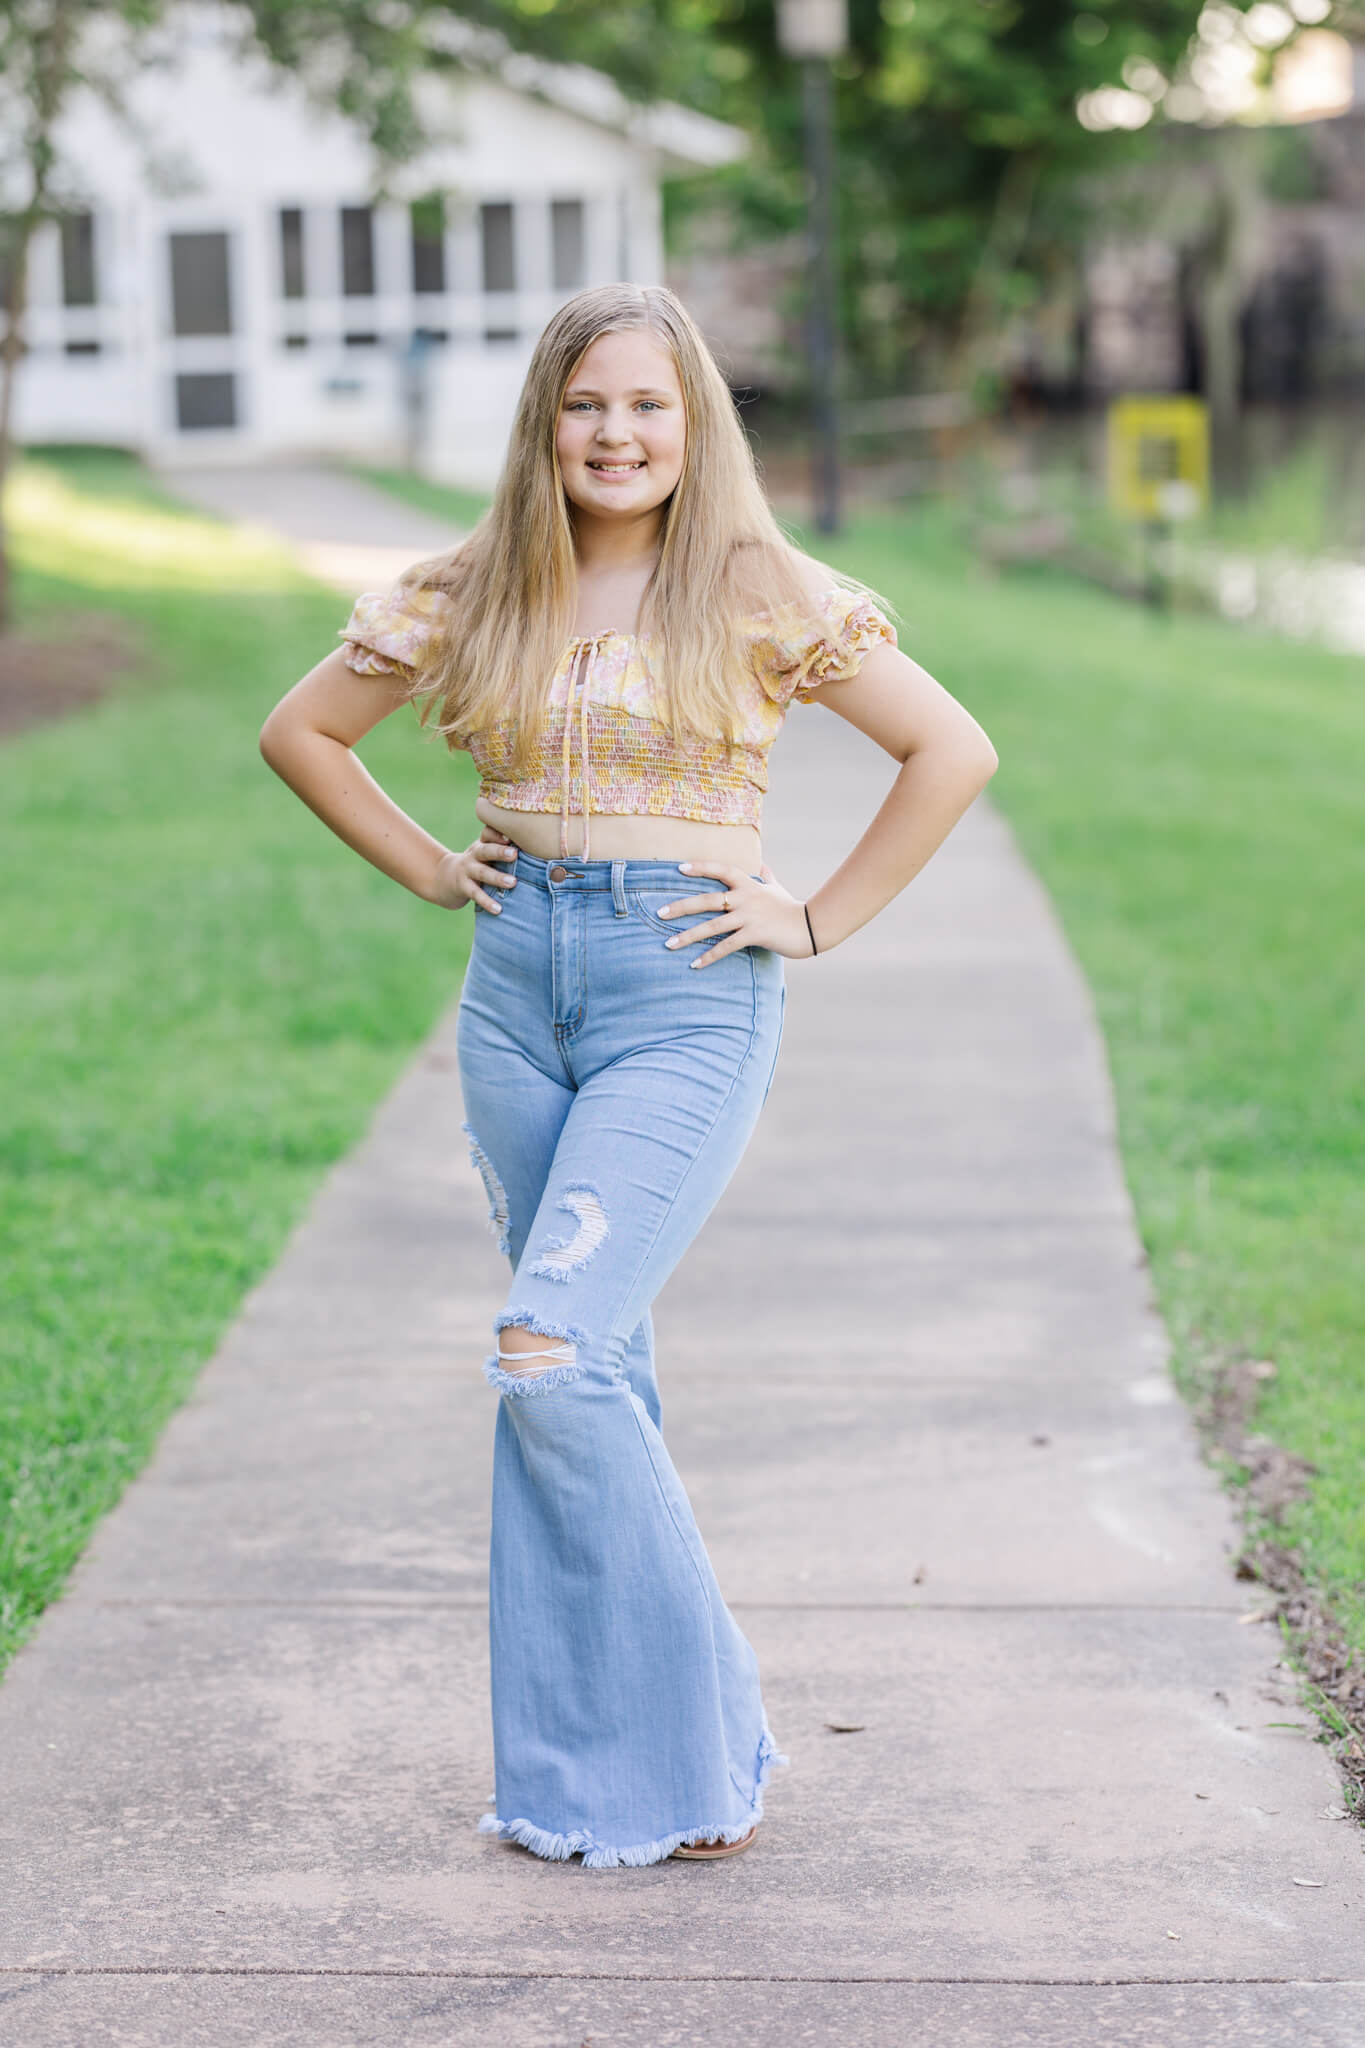 girl in yellow shirt and jeans capturing a pose alone during her sibling session at the savannah rapids.

private schools in augusta ga